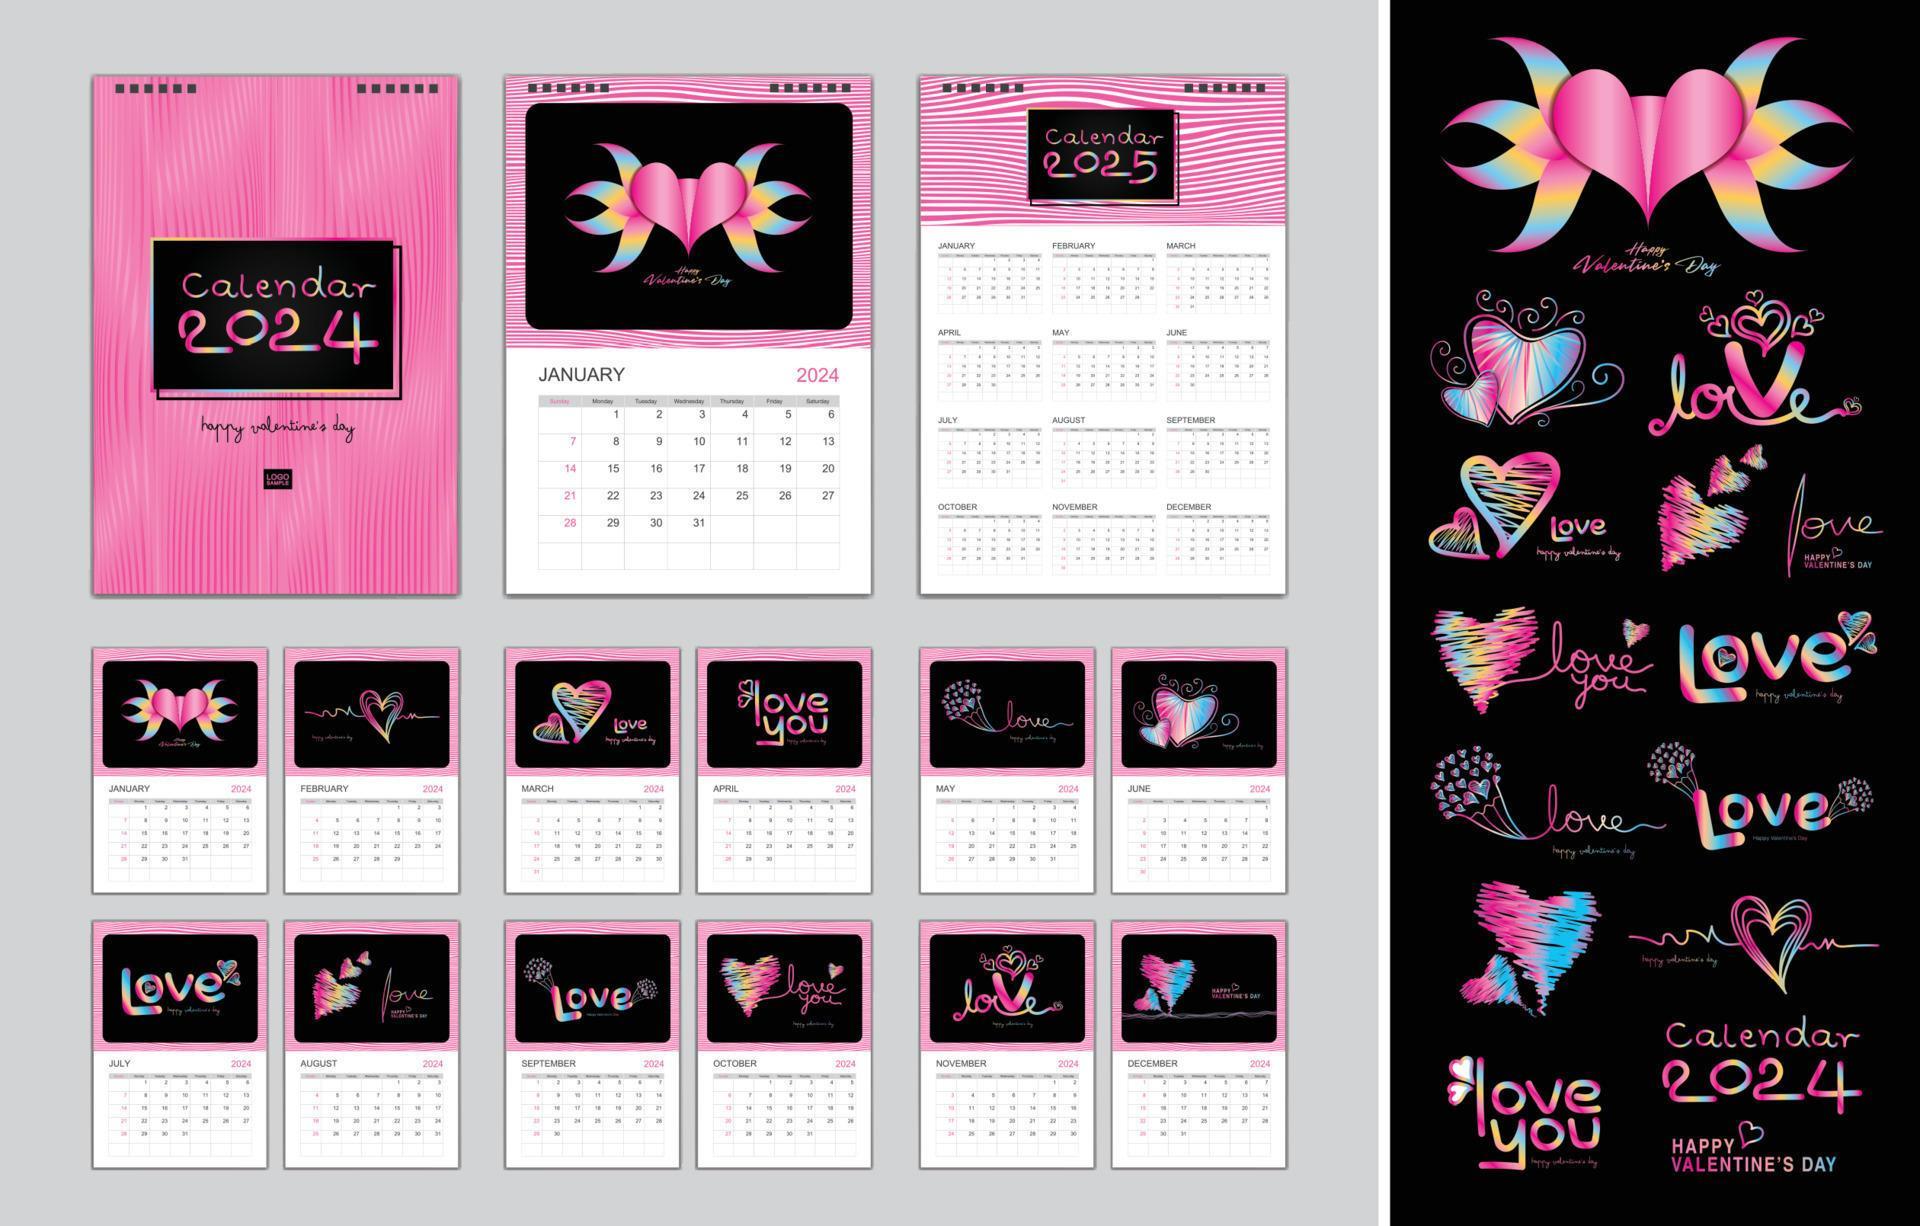 calendar-2024-template-for-holiday-happy-valentine-s-day-concept-desk-calendar-2024-year-wall